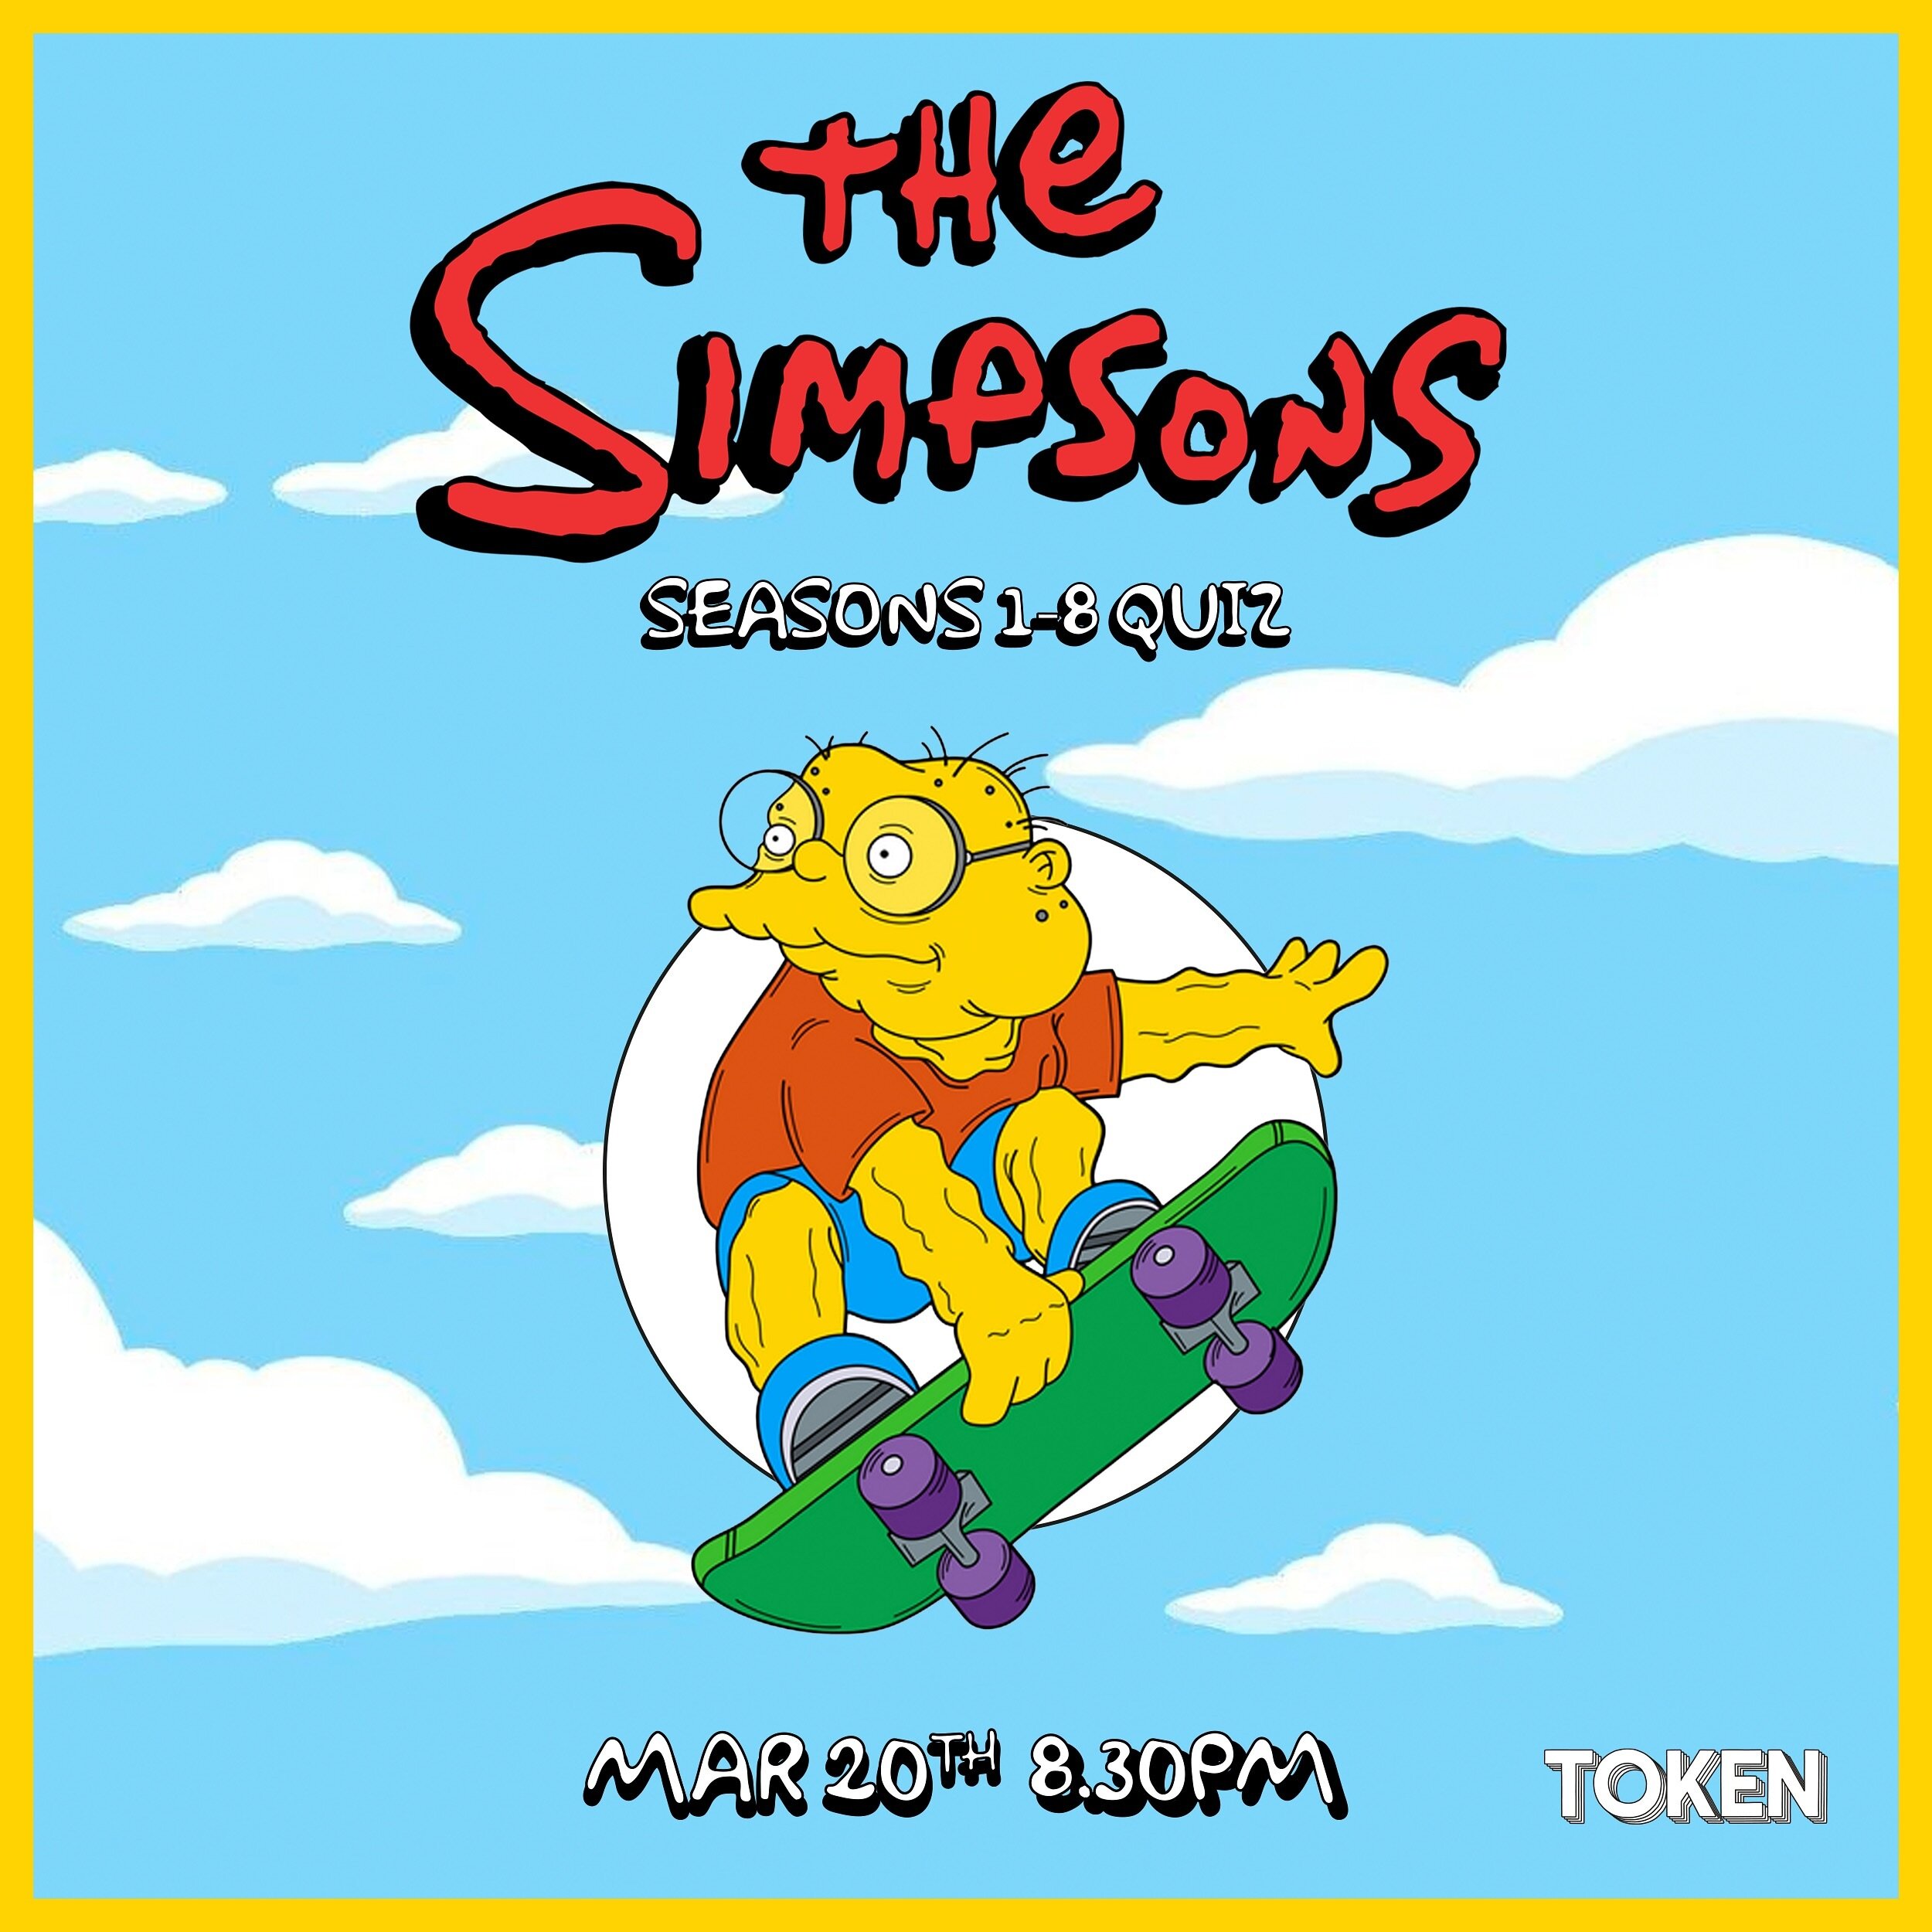 🎟️ Tickets are now on sale for our Simpsons Season 1-8 Quiz Night on March 20, 8.30pm! Available through the link in our bio, or on our website.

Costs &euro;30 per table (table holds up to 5 people), winner takes home &euro;150, there will be a the